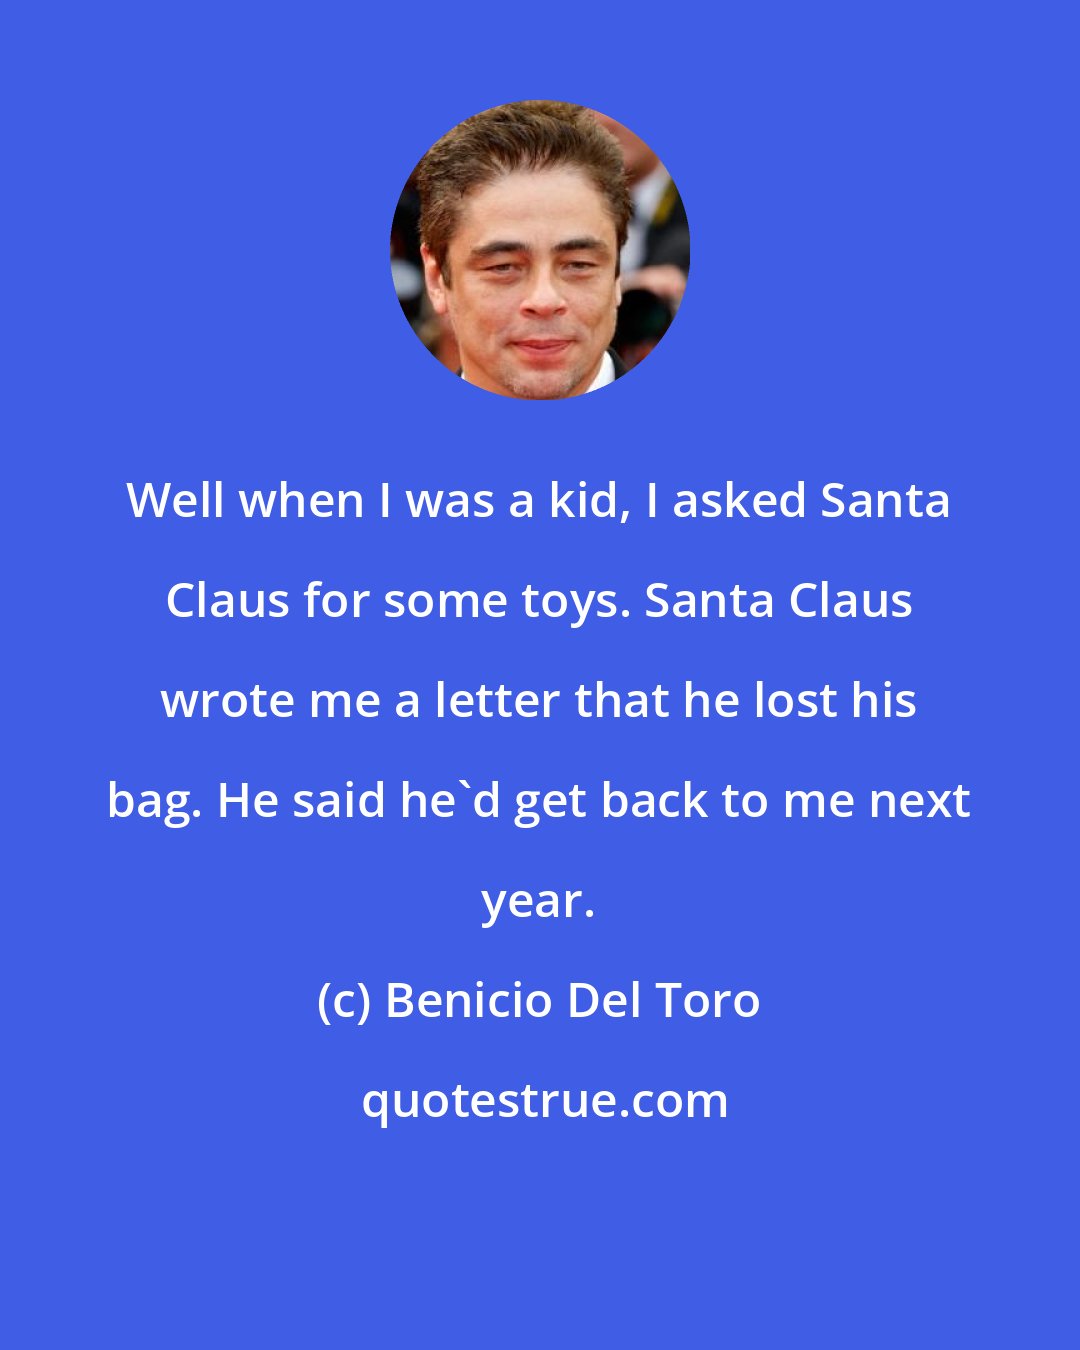 Benicio Del Toro: Well when I was a kid, I asked Santa Claus for some toys. Santa Claus wrote me a letter that he lost his bag. He said he'd get back to me next year.